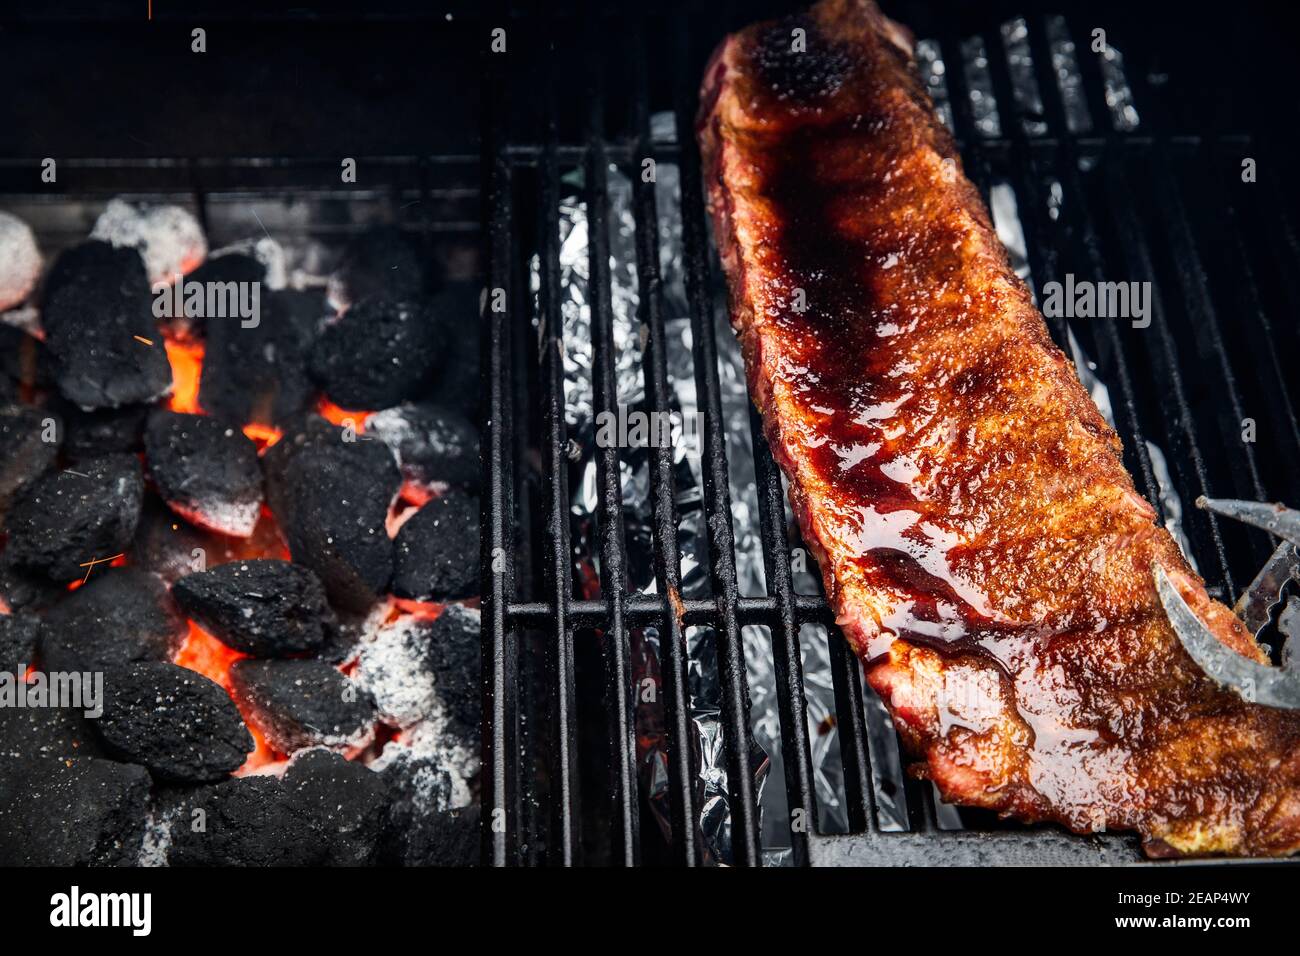 Close-up Of BBQ Roast and Smoked Pork Spareribs glazed with sauze On The  Hot Charcoal Grill With Flames, Barbecue and hobby concept Stock Photo -  Alamy